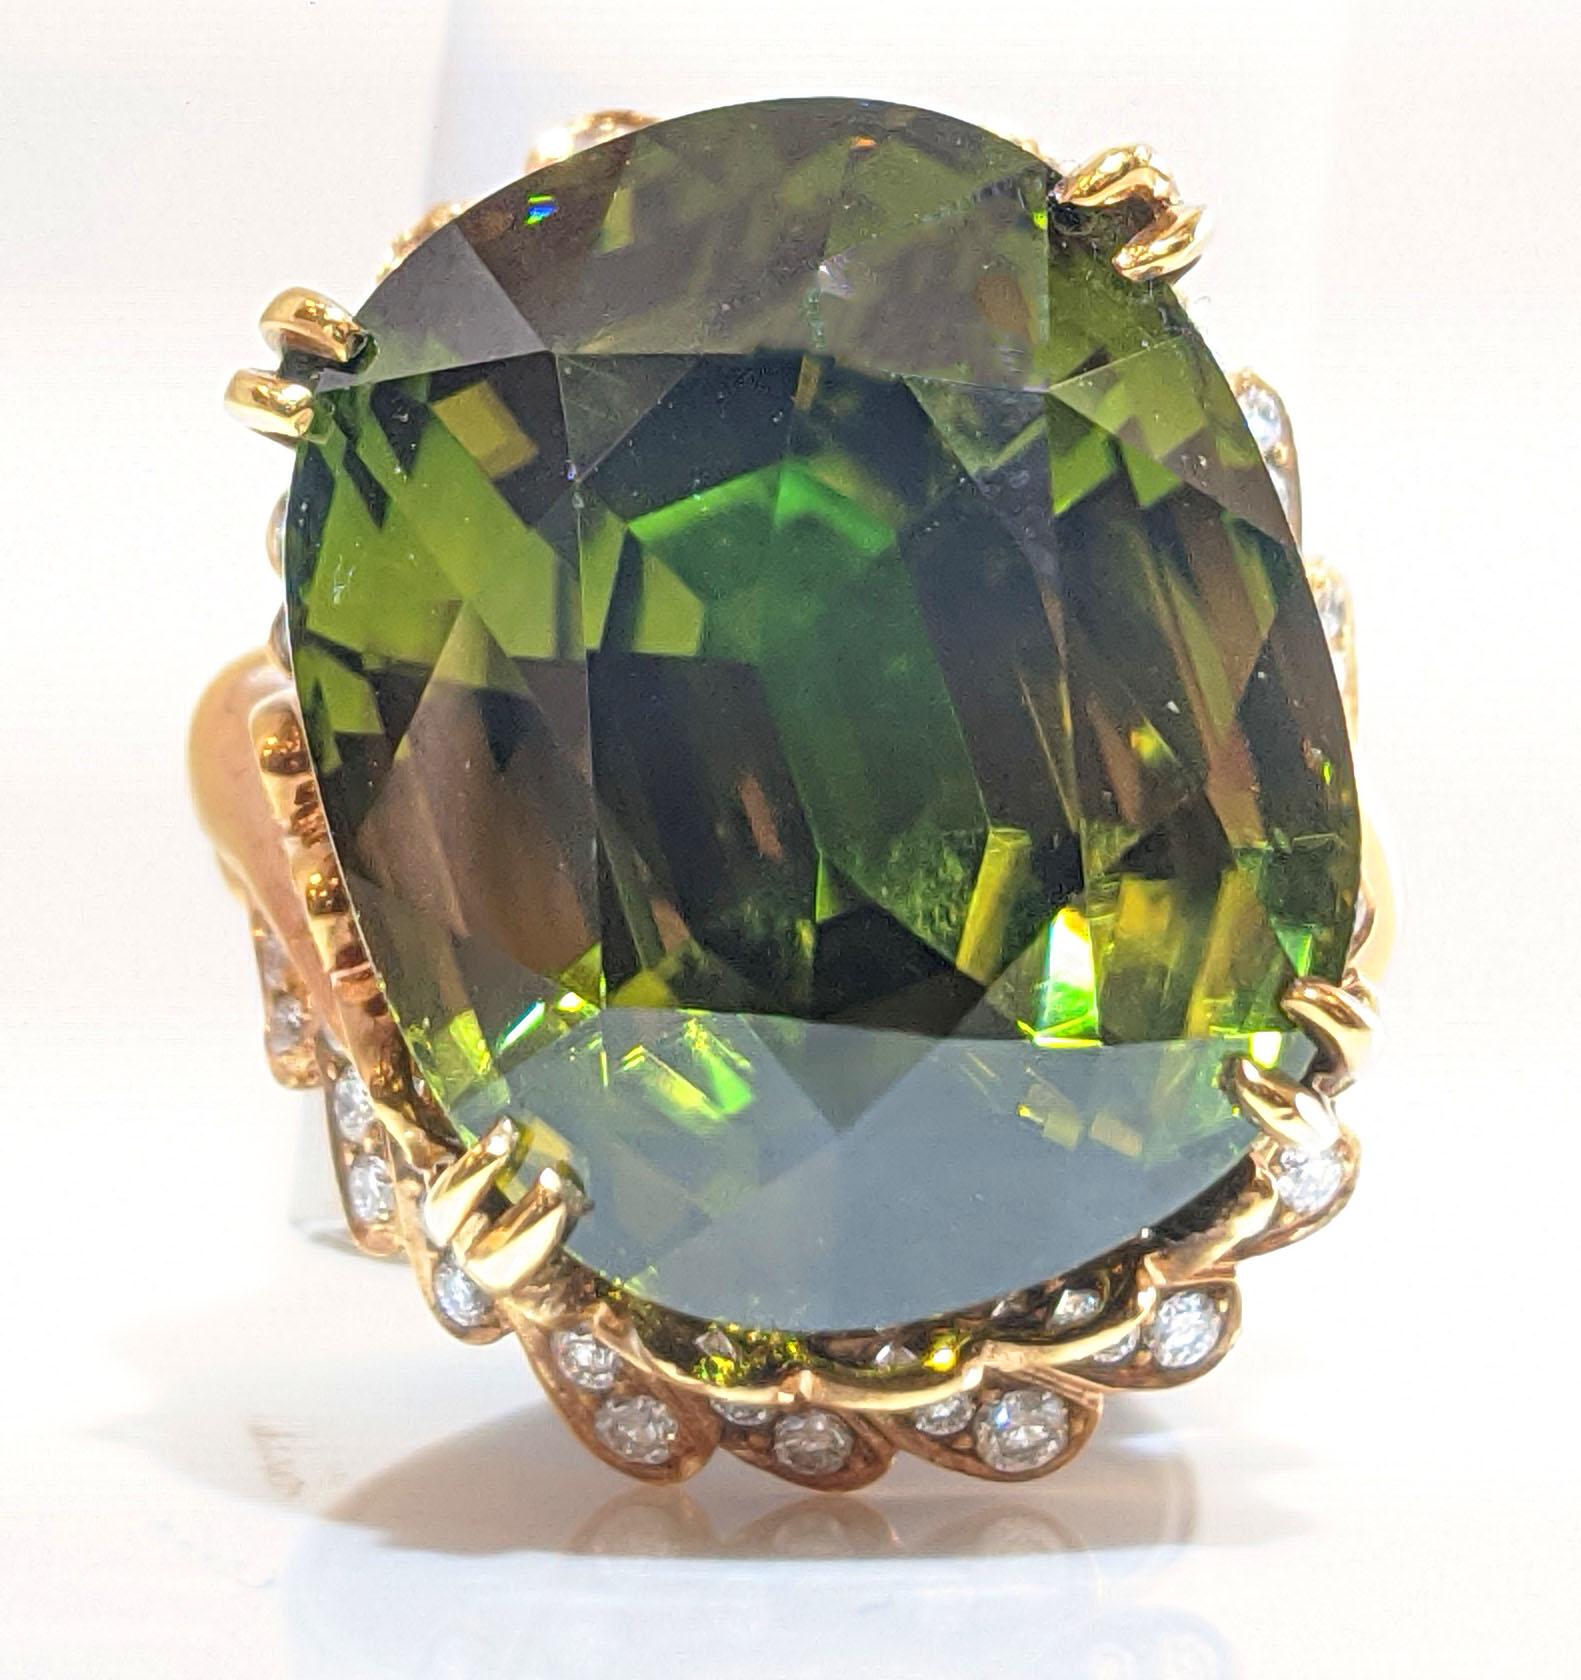 This unbelievable green zircon is rare at 10 carats, hard to find at 20, and irreplaceable at 45 carats! The scintillation and sparkle in this stone are truly breathtaking. Most would assume you had the sister stone to the Dresden Green! Zircon has